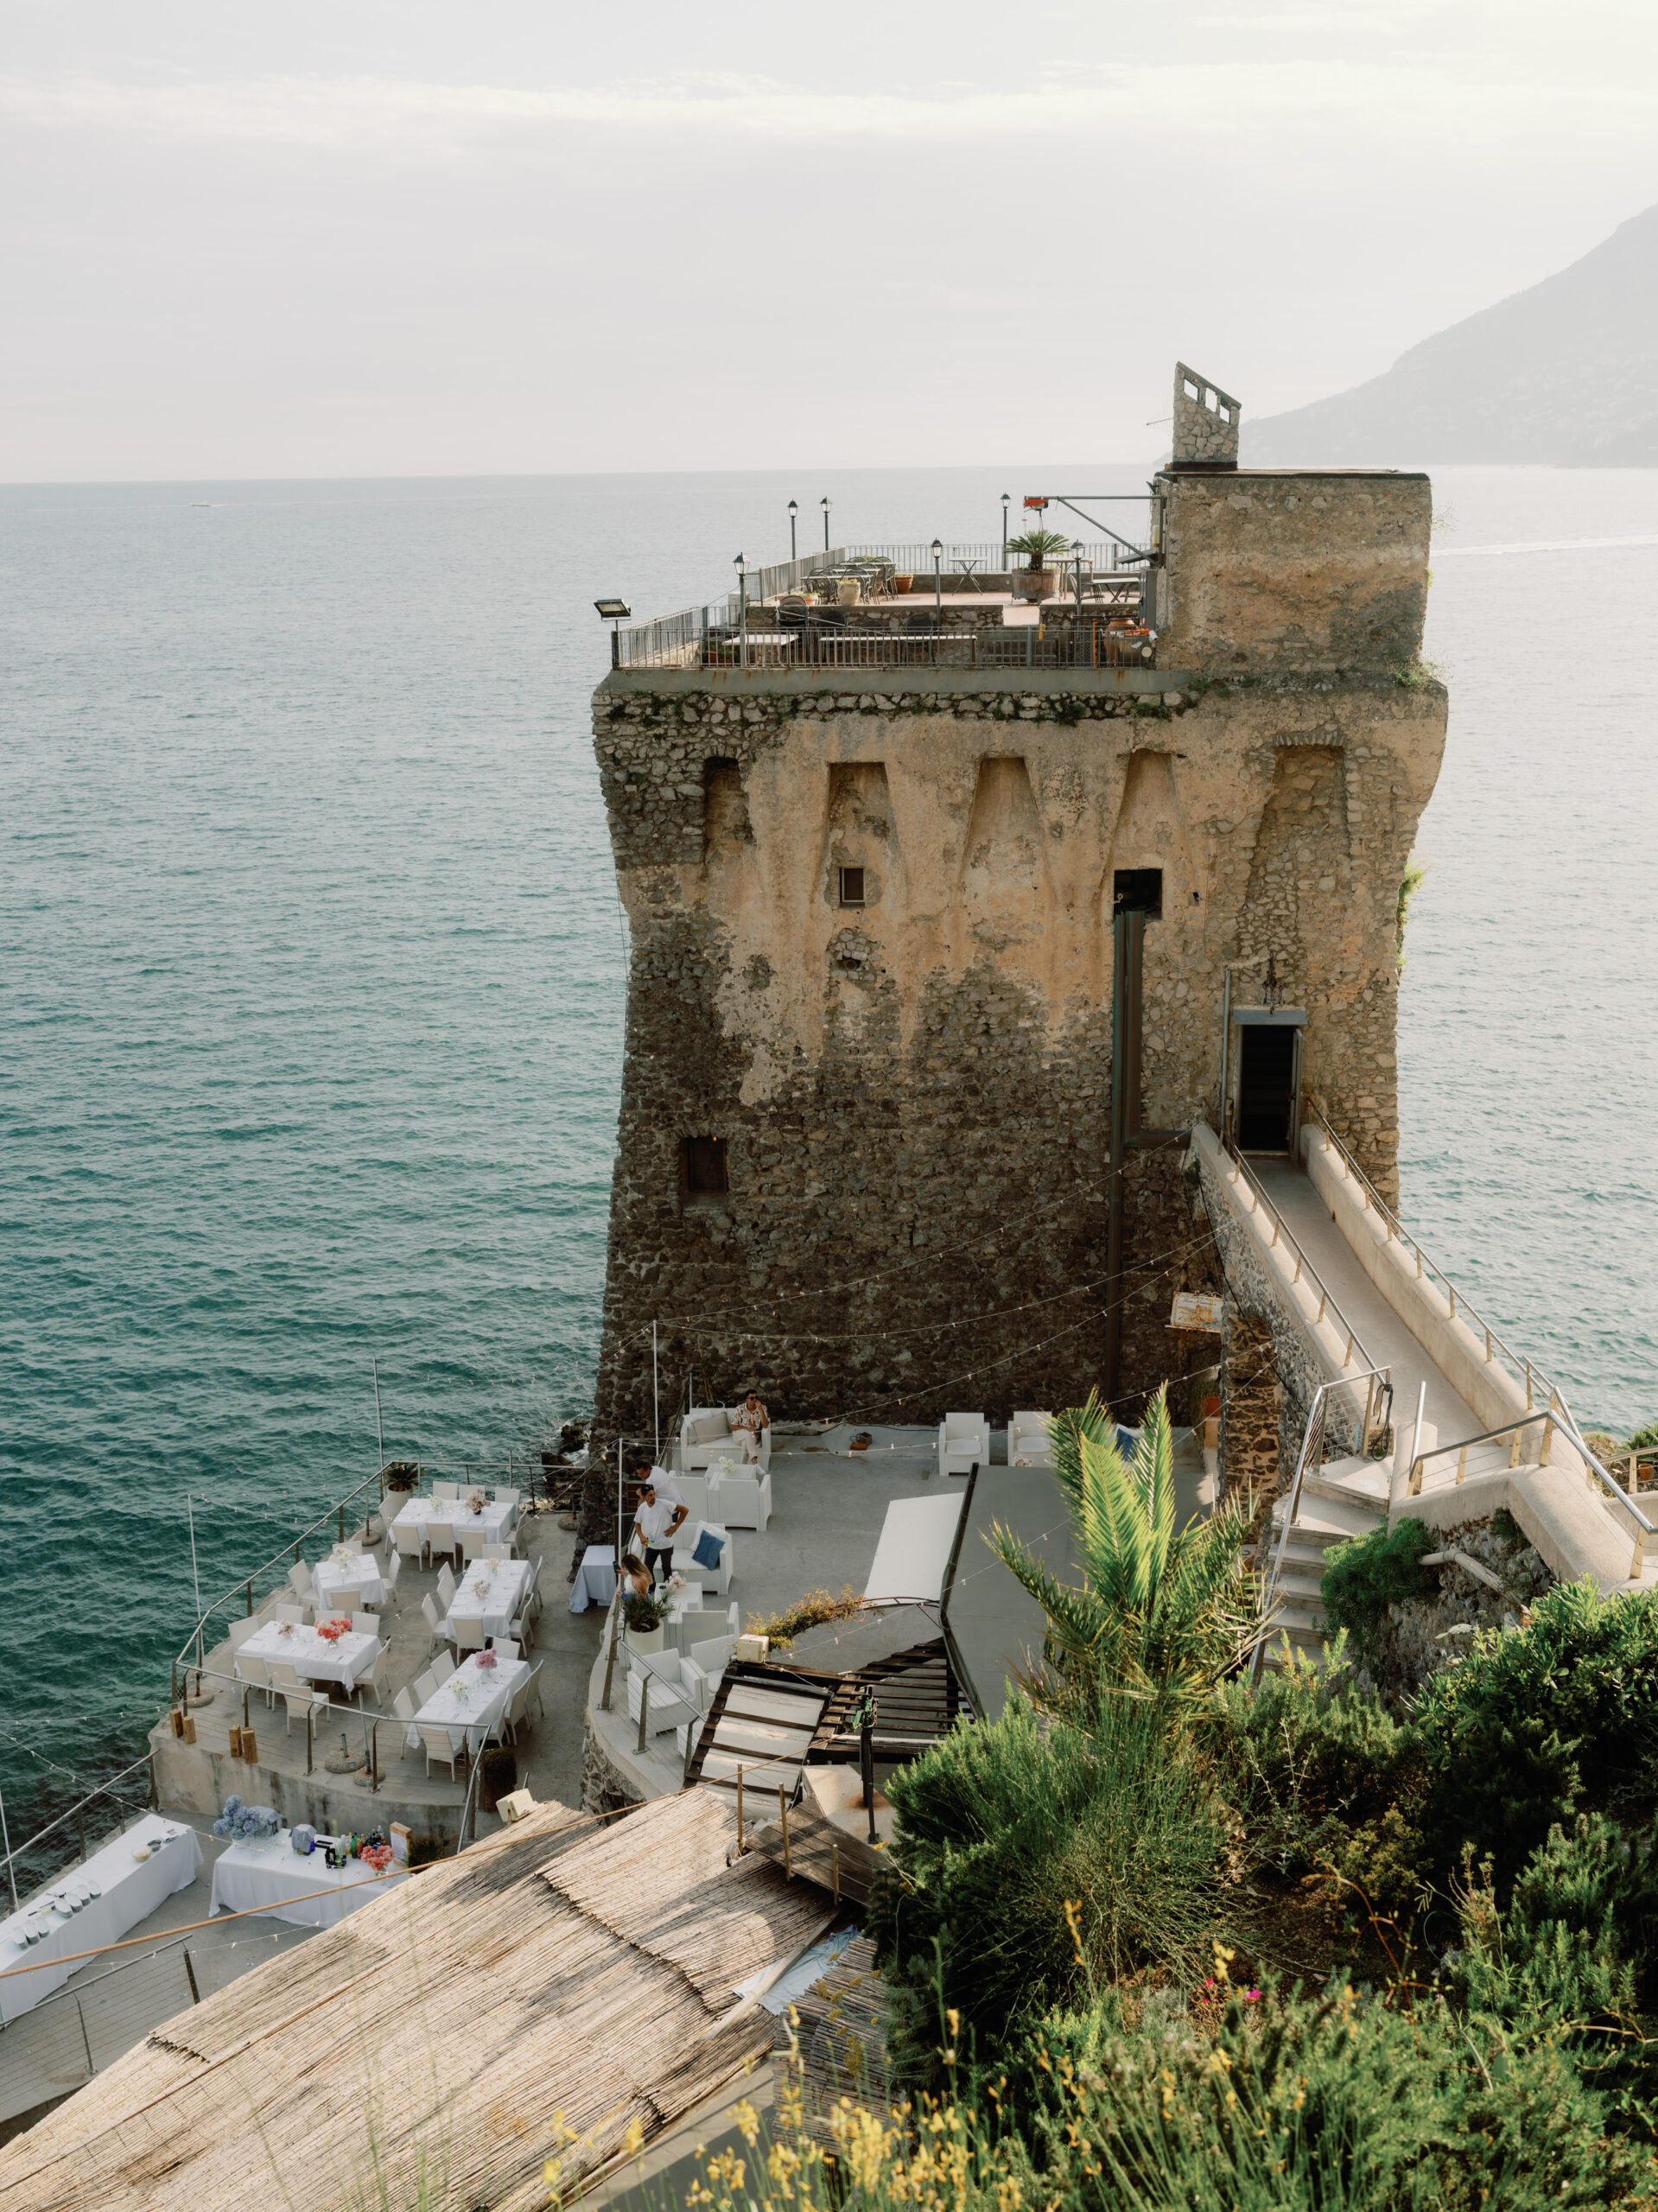 A medieval villa perched on a mountain, overlooking the Amalfi coast. Destination wedding in Italy image by Jenny Fu Studio.